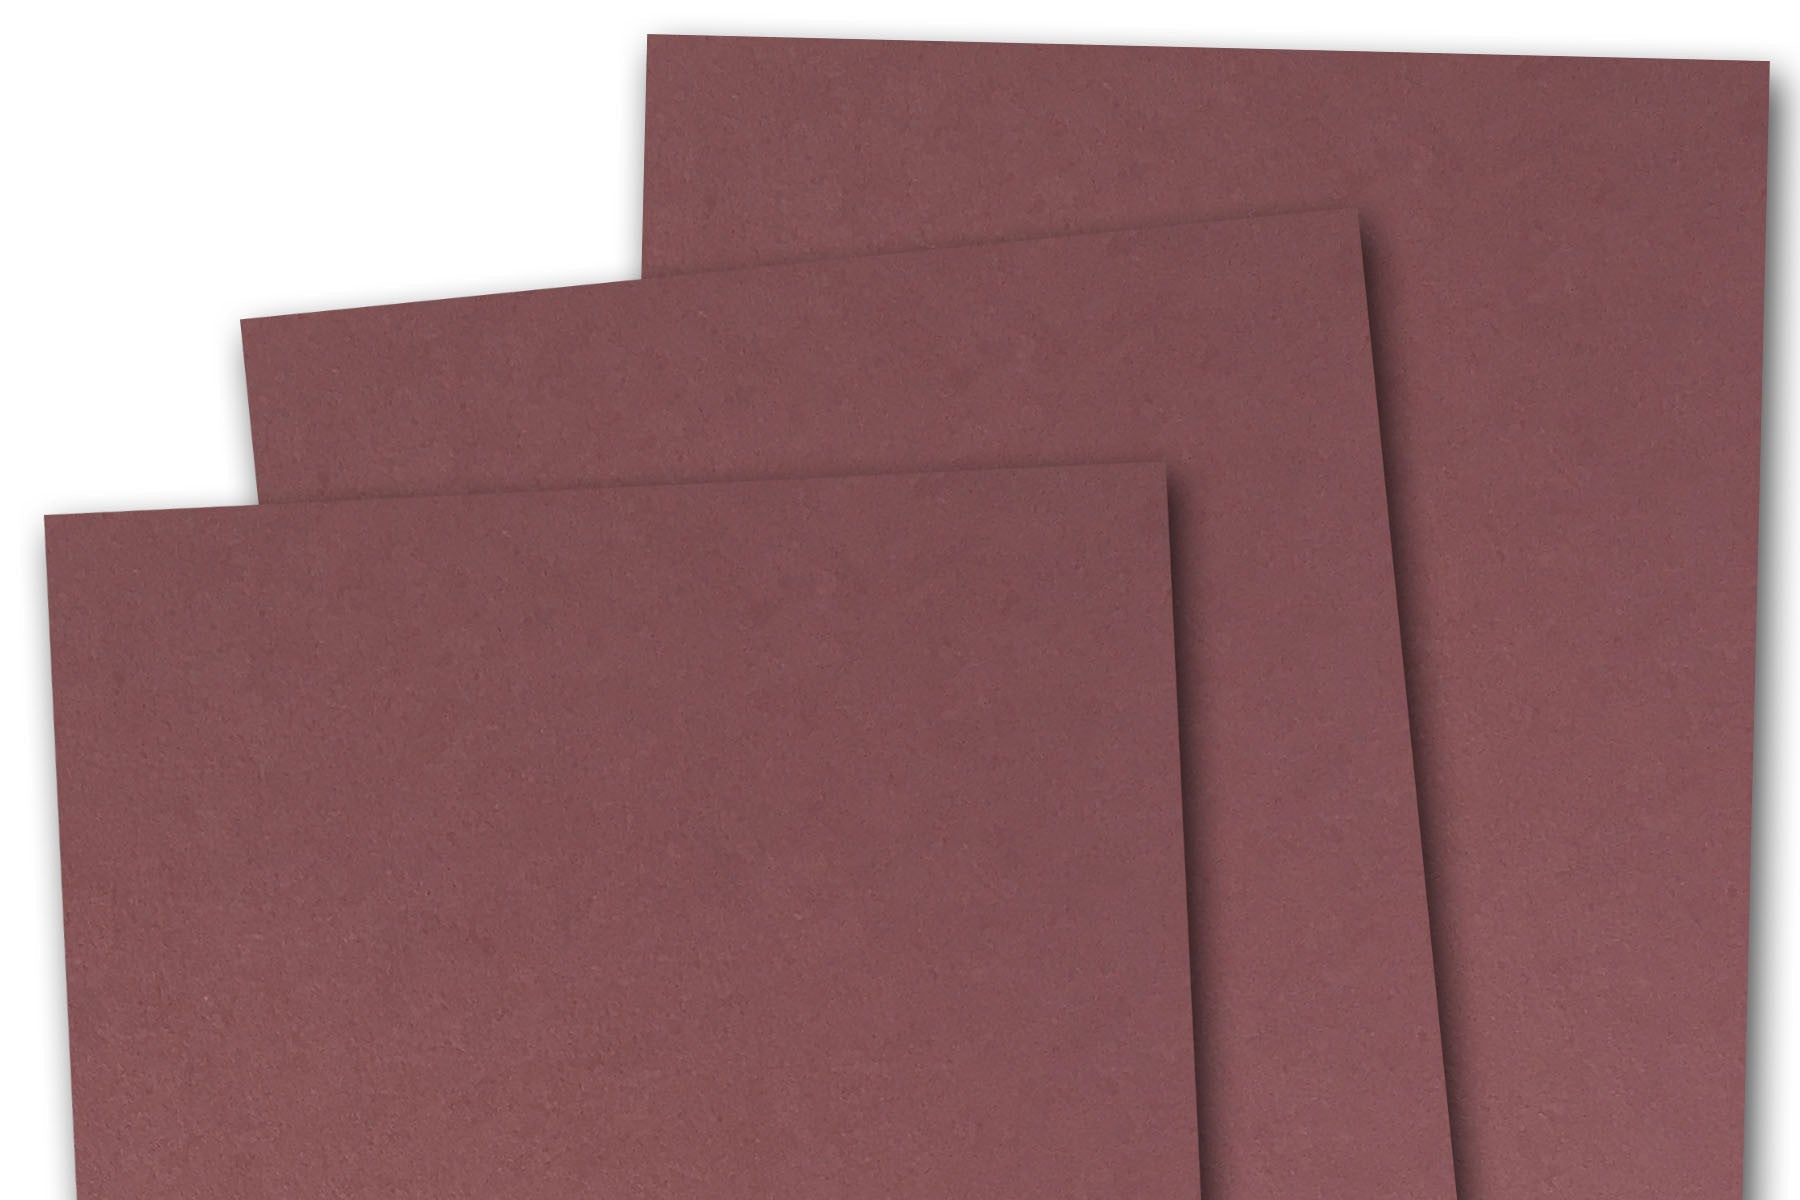 Color Card Stock Paper, 8.5 x 11/50 Sheets Per Pack - Red Color